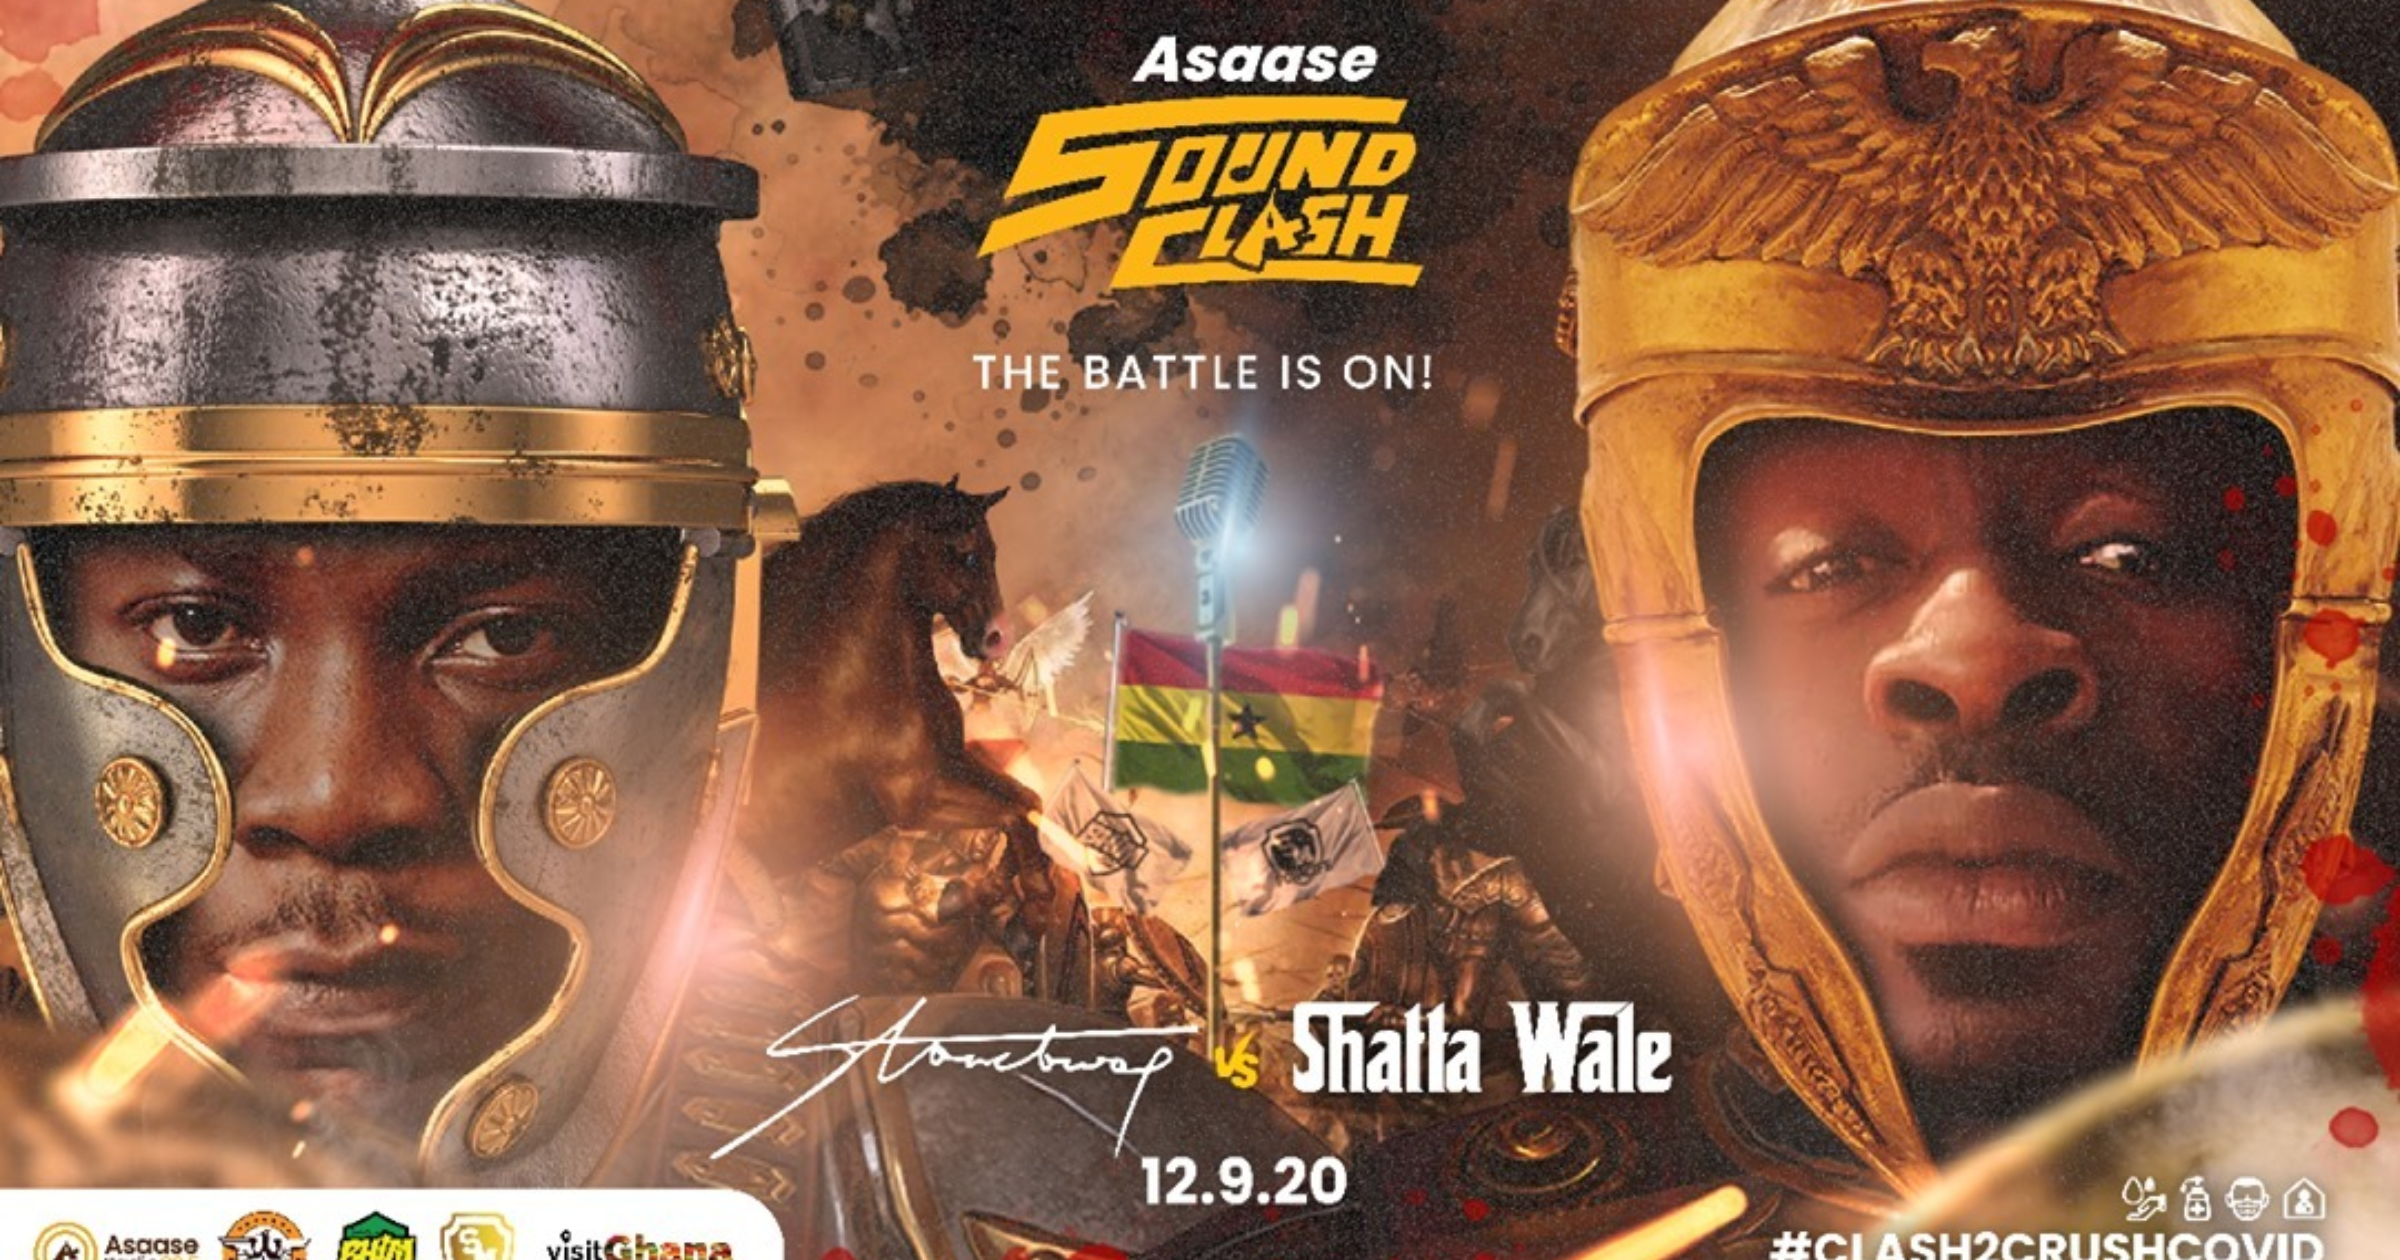 Shatta Wale pulls out of Asaase Soundclash; cites manipulation for Stonebwoy